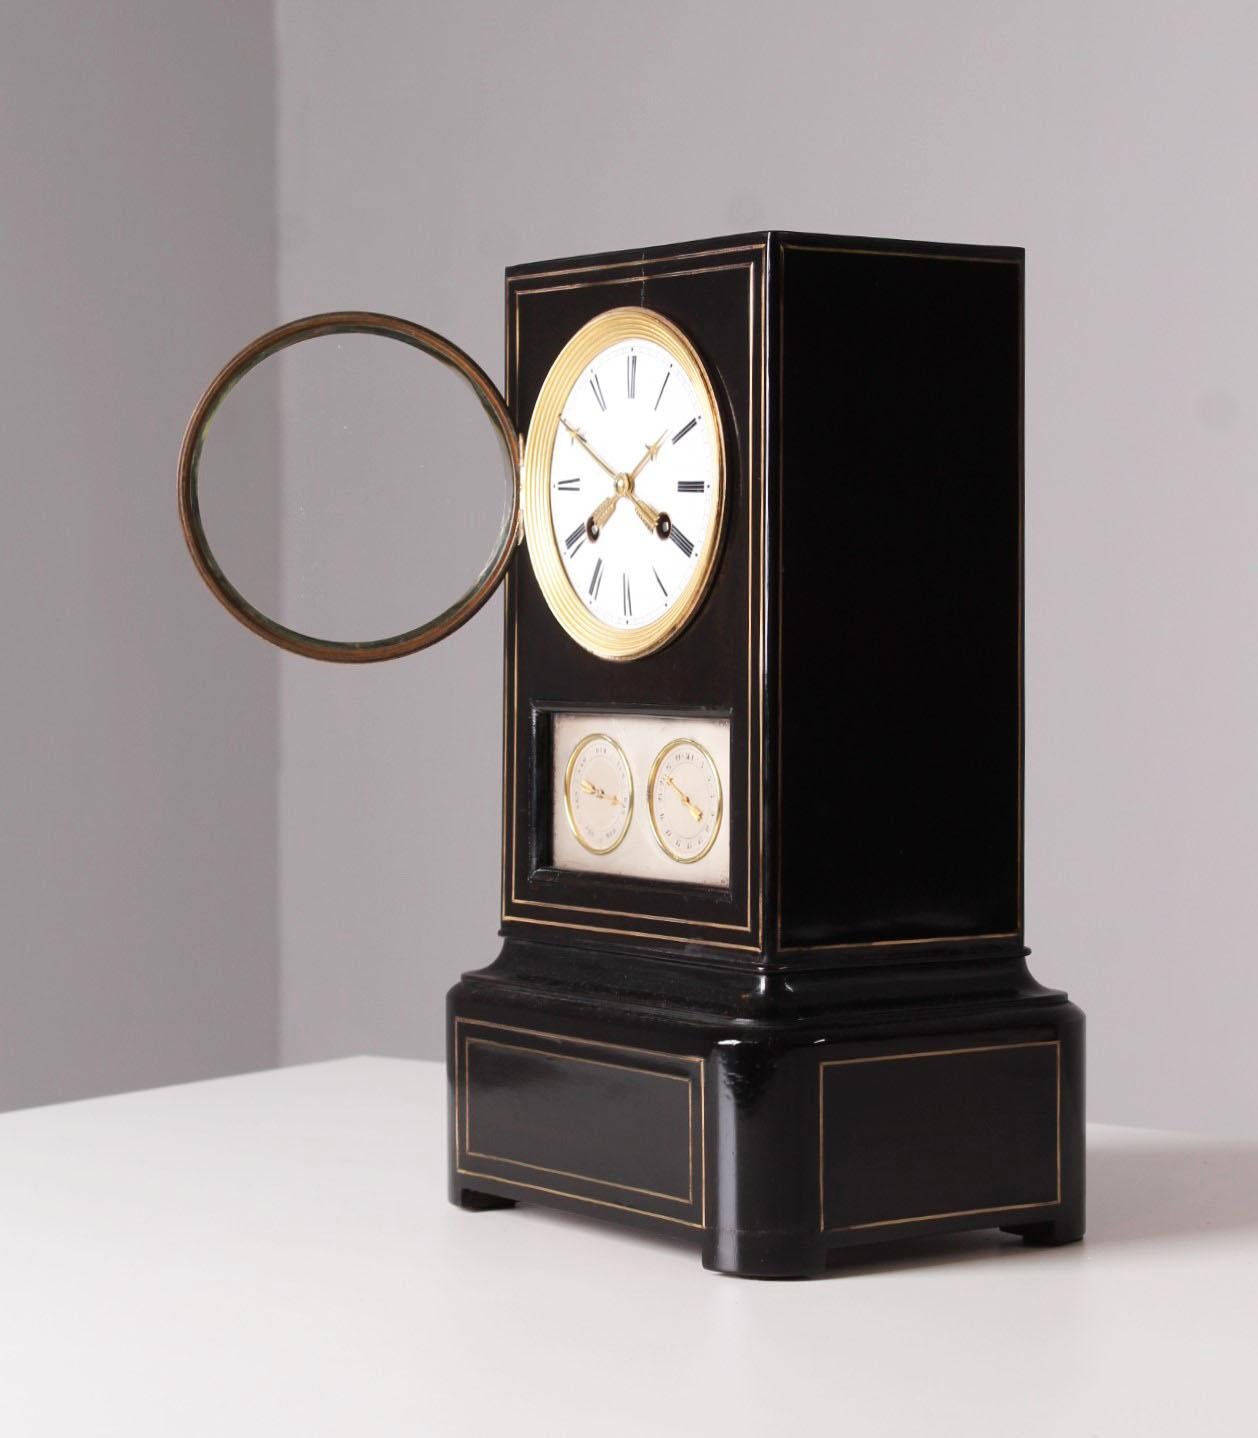 19th Century Table Clock with Calendar, Ebonized Wood, France, circa 1840-1860 In Good Condition For Sale In Greven, DE